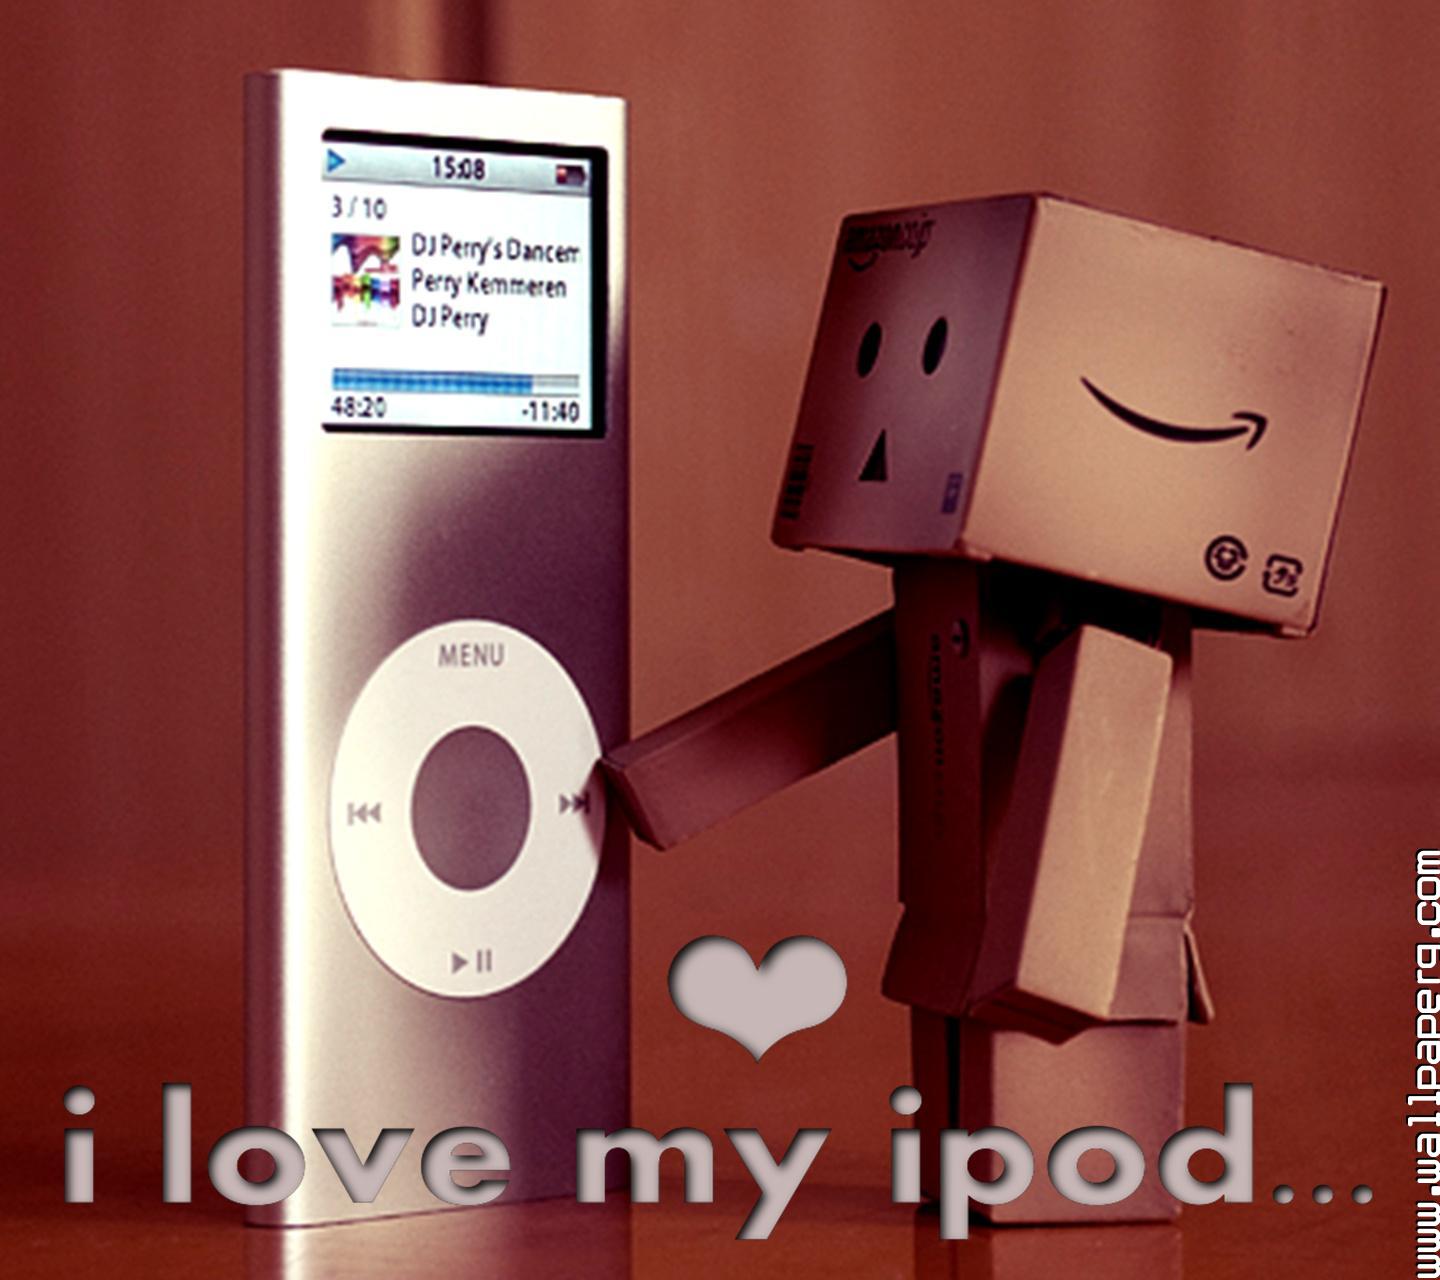 Download I love my ipod - Hurt wallpapers for your mobile cell phone